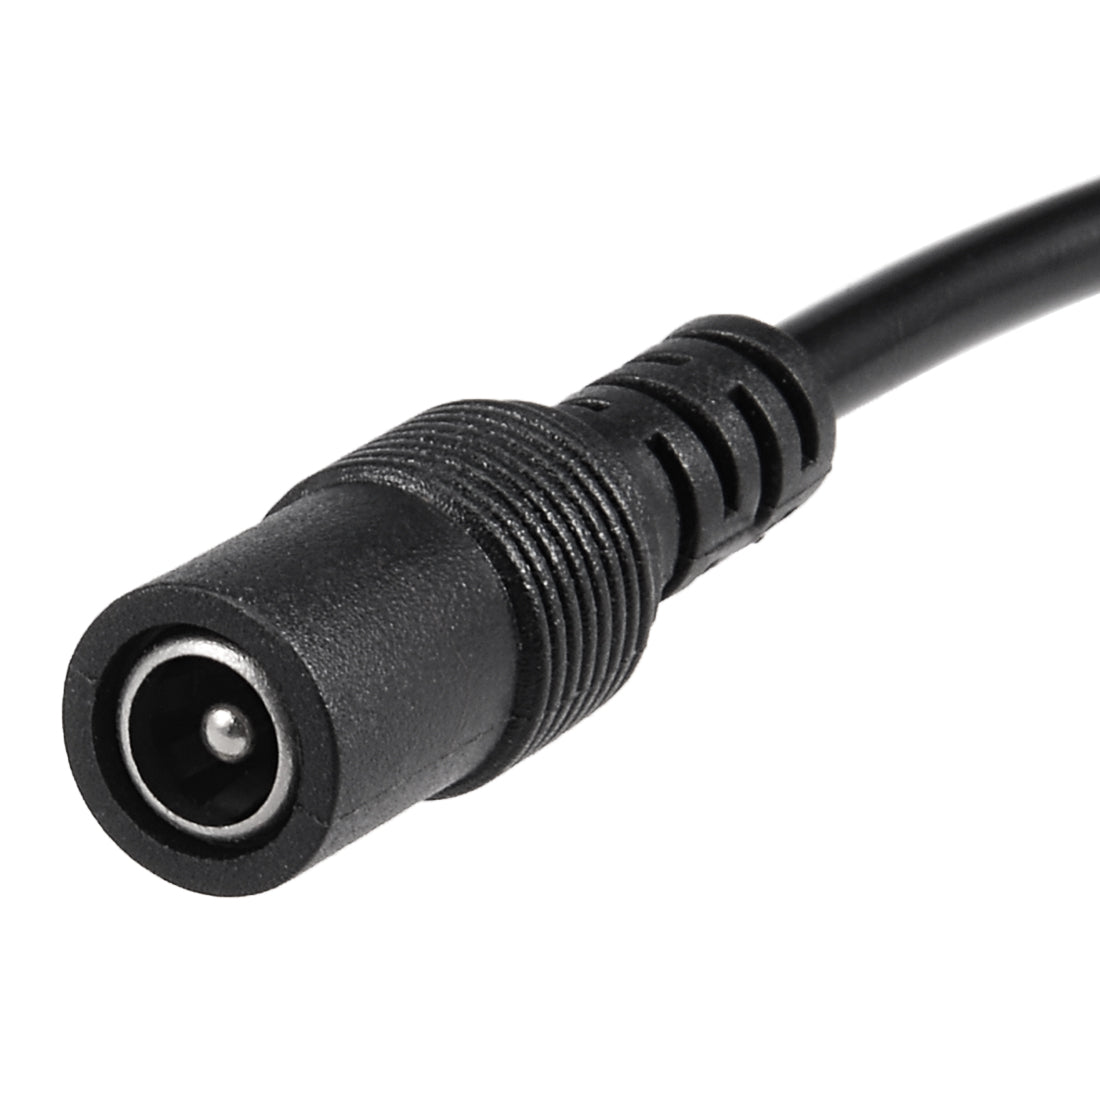 uxcell Uxcell 15cm 12V Plastic Female DC Power Pigtail Cable Connector 22AWG for CCTV Security Camera 2.1 x 5.5mm